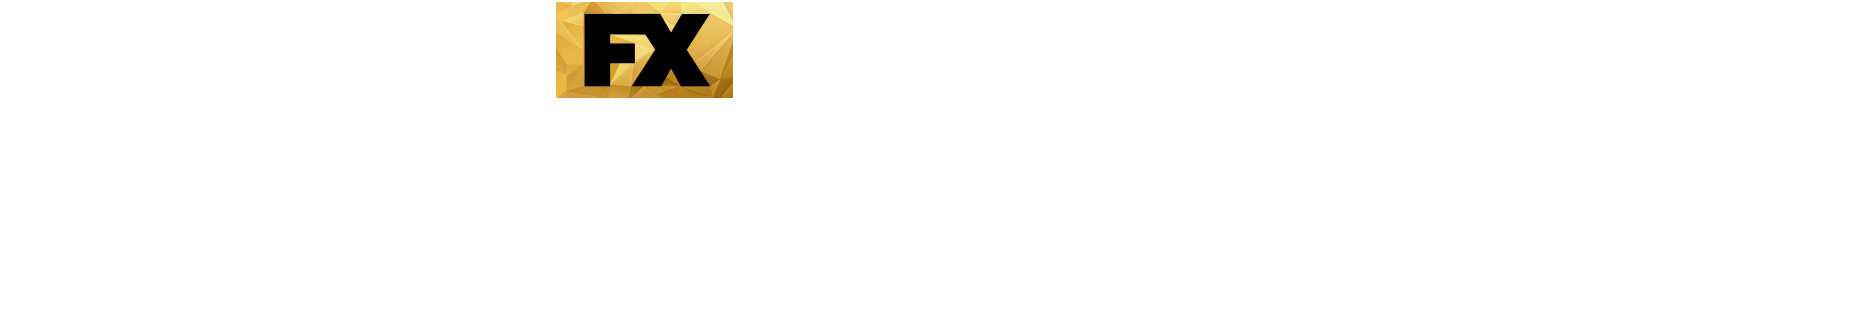 Better Things Show Logo